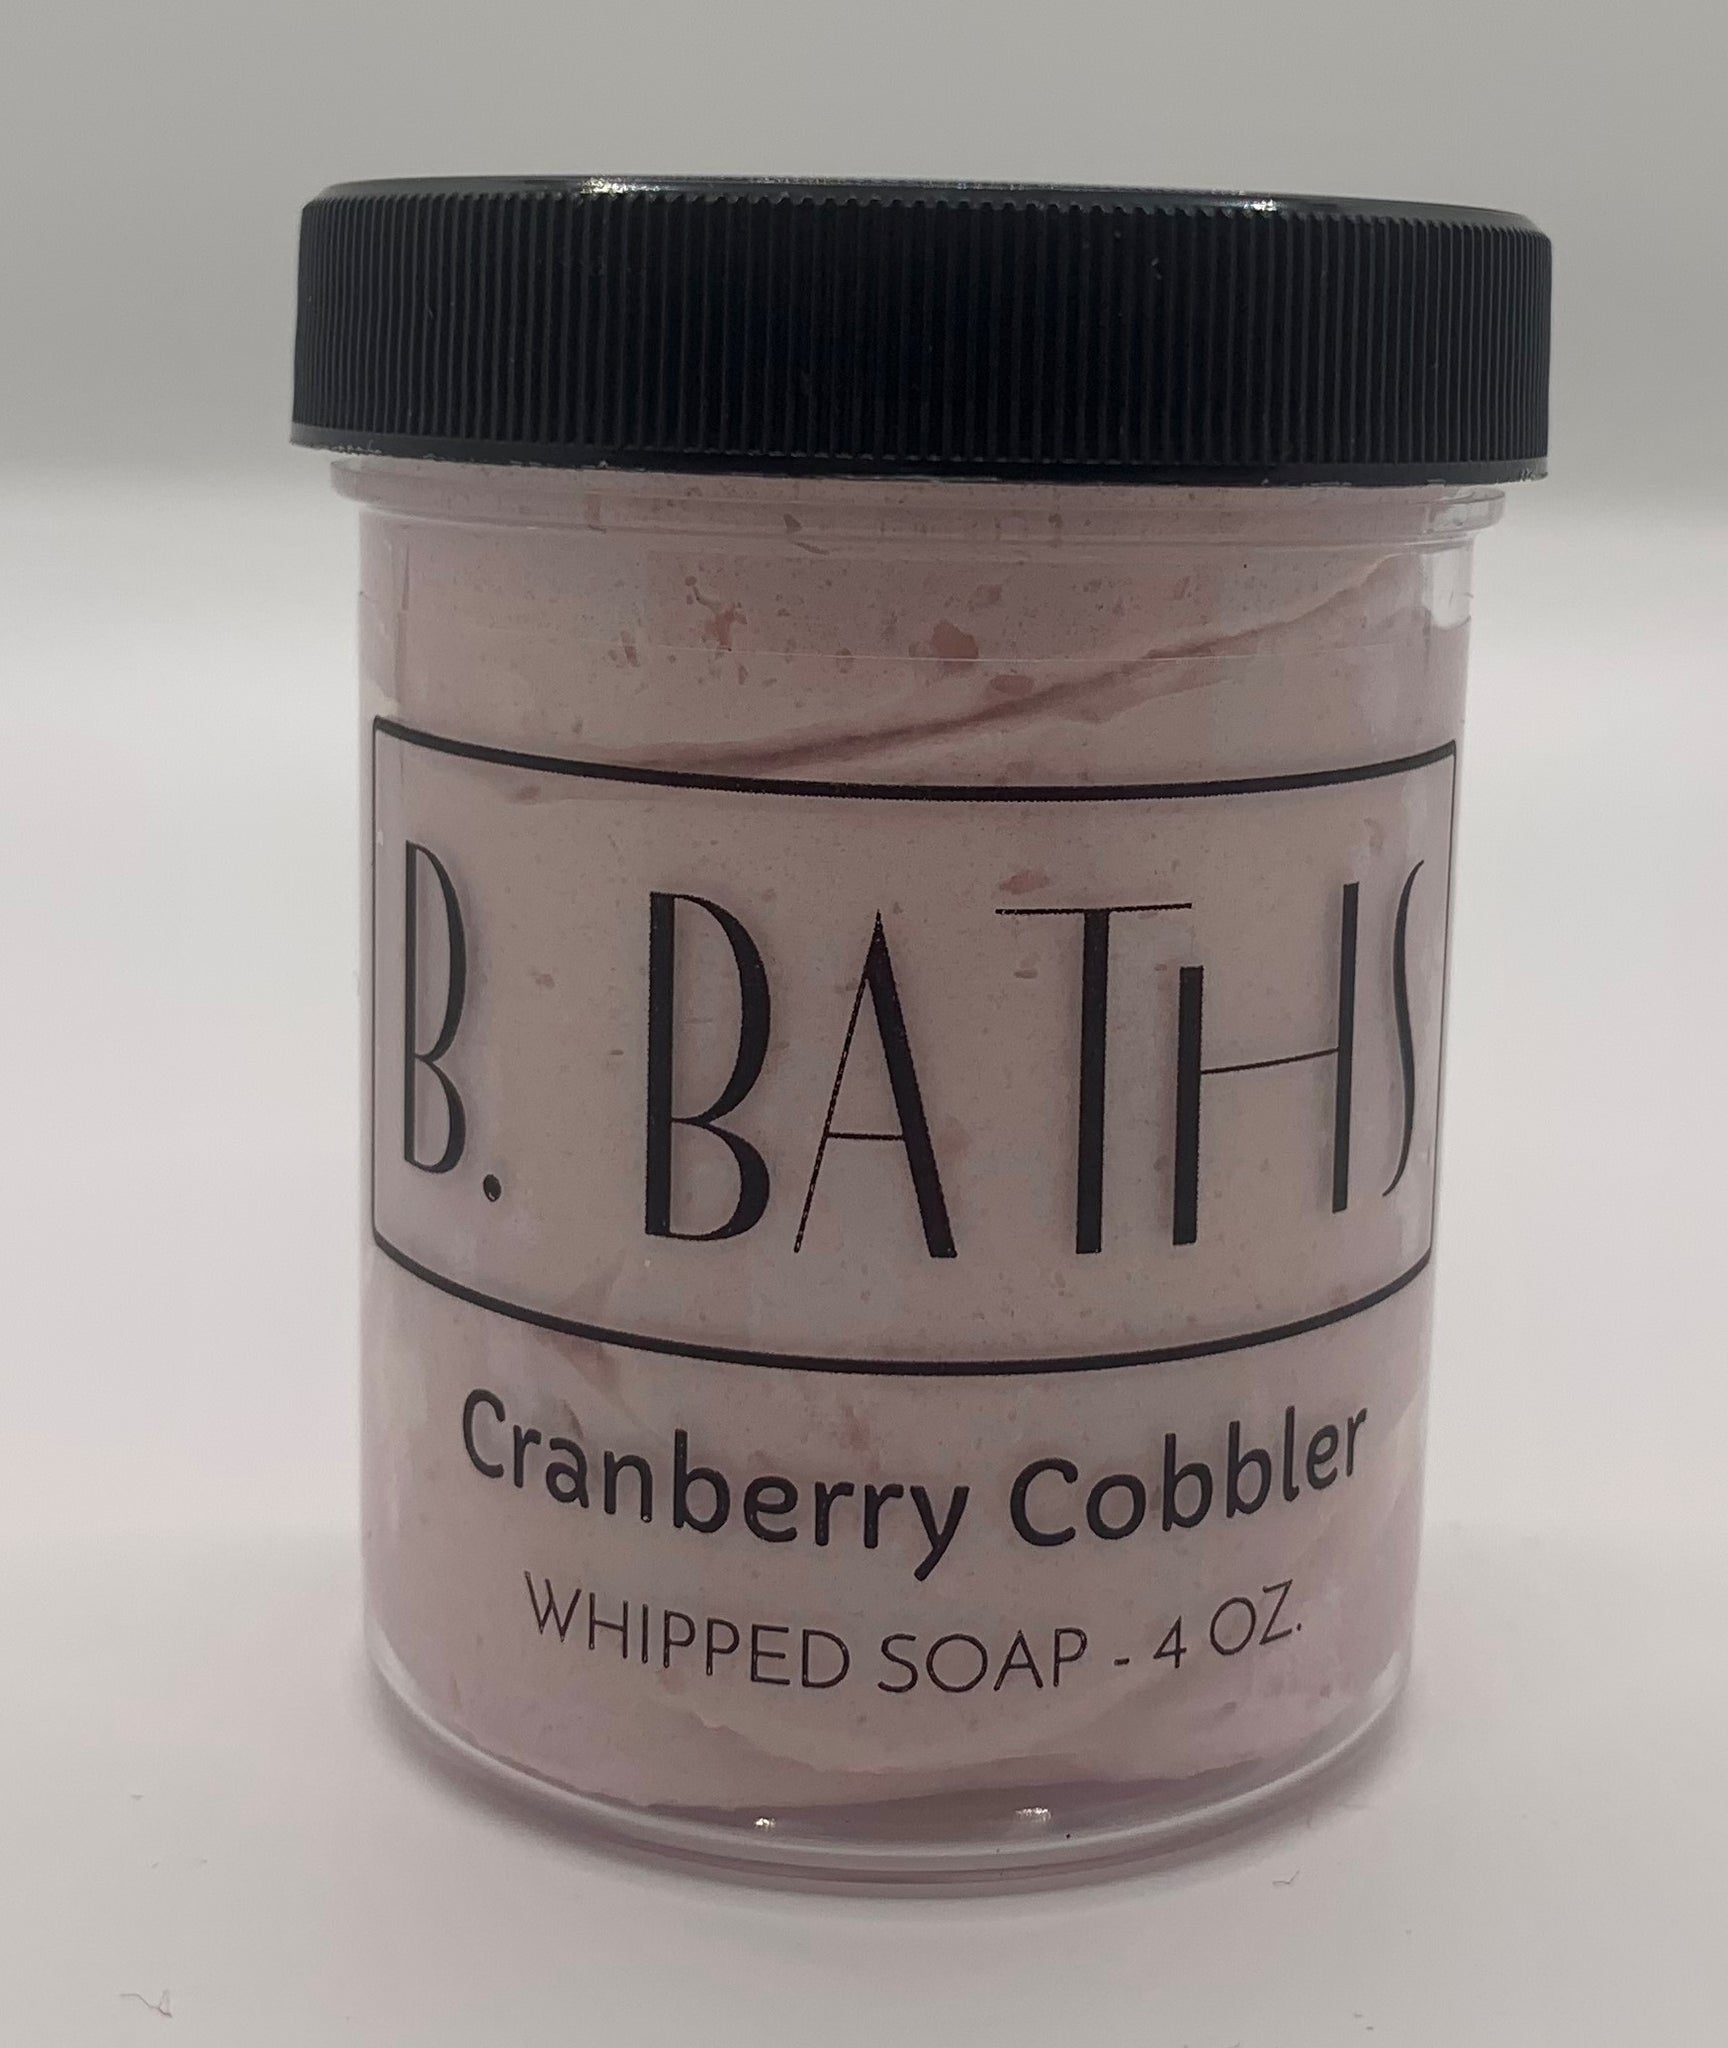 Cranberry Cobbler Whipped Soap